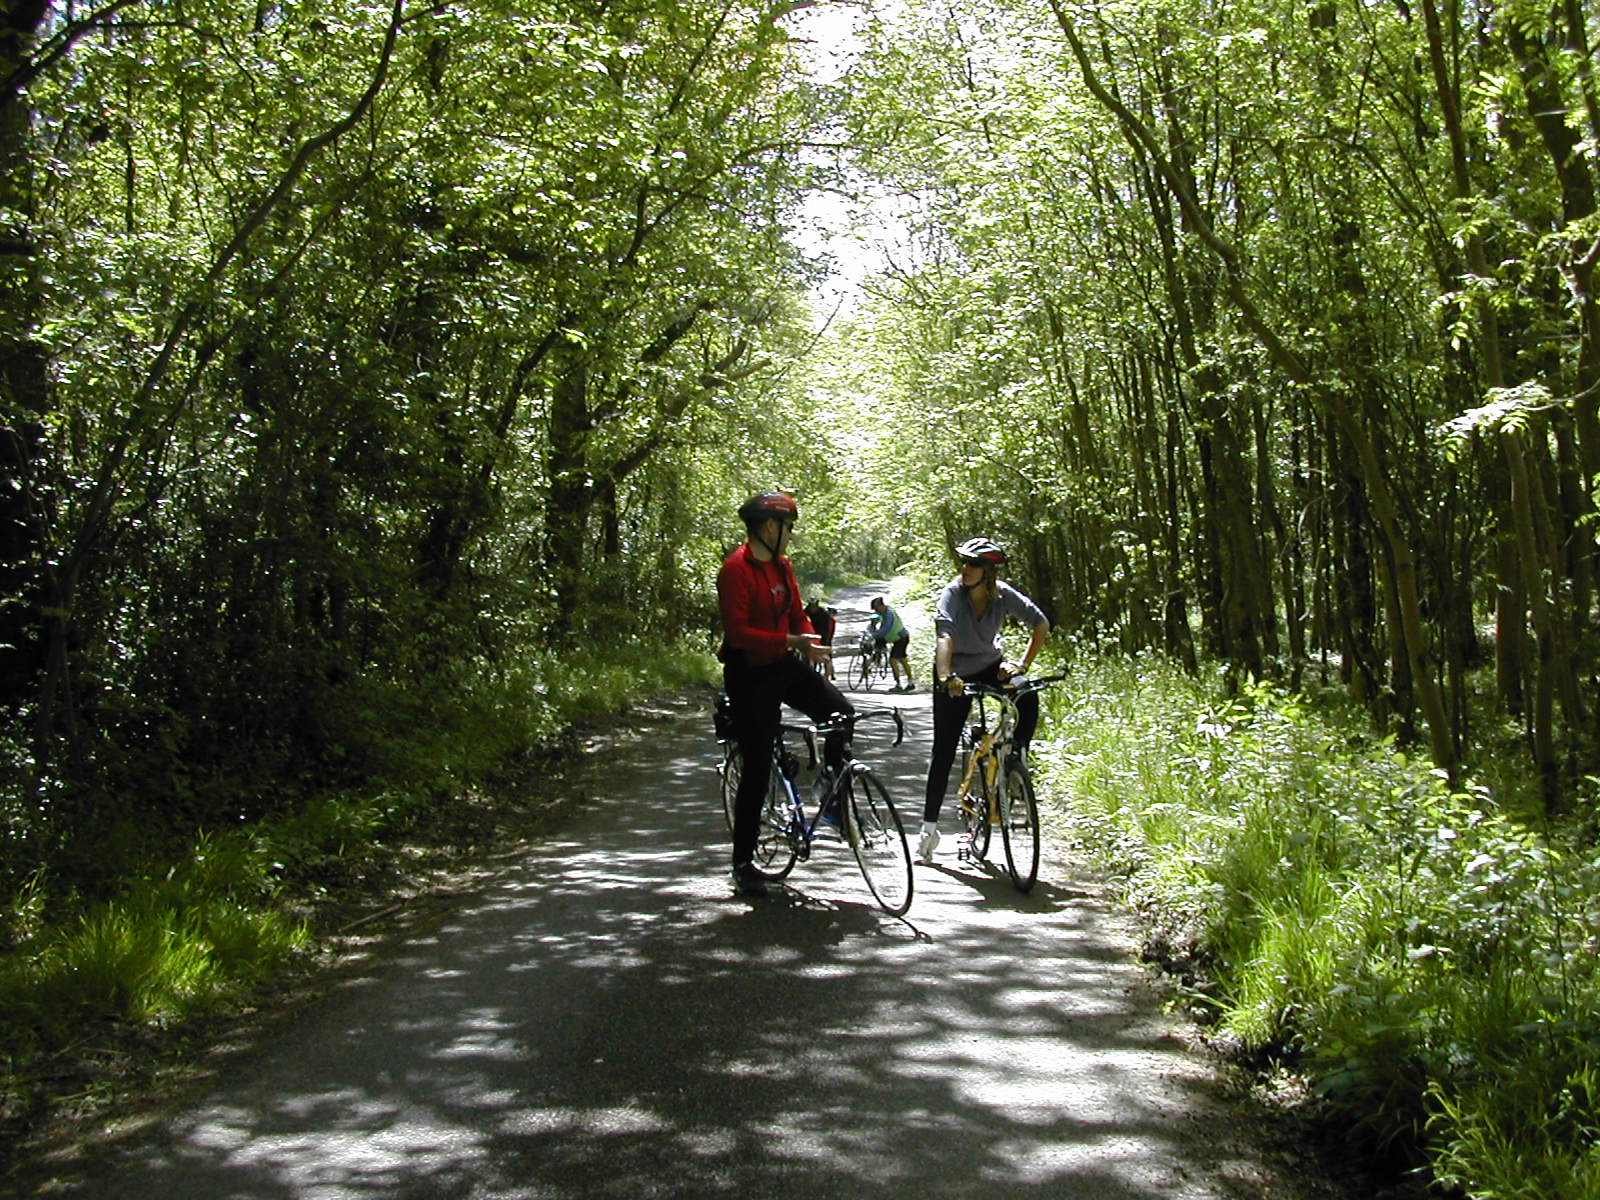 Cyclists in a country lane